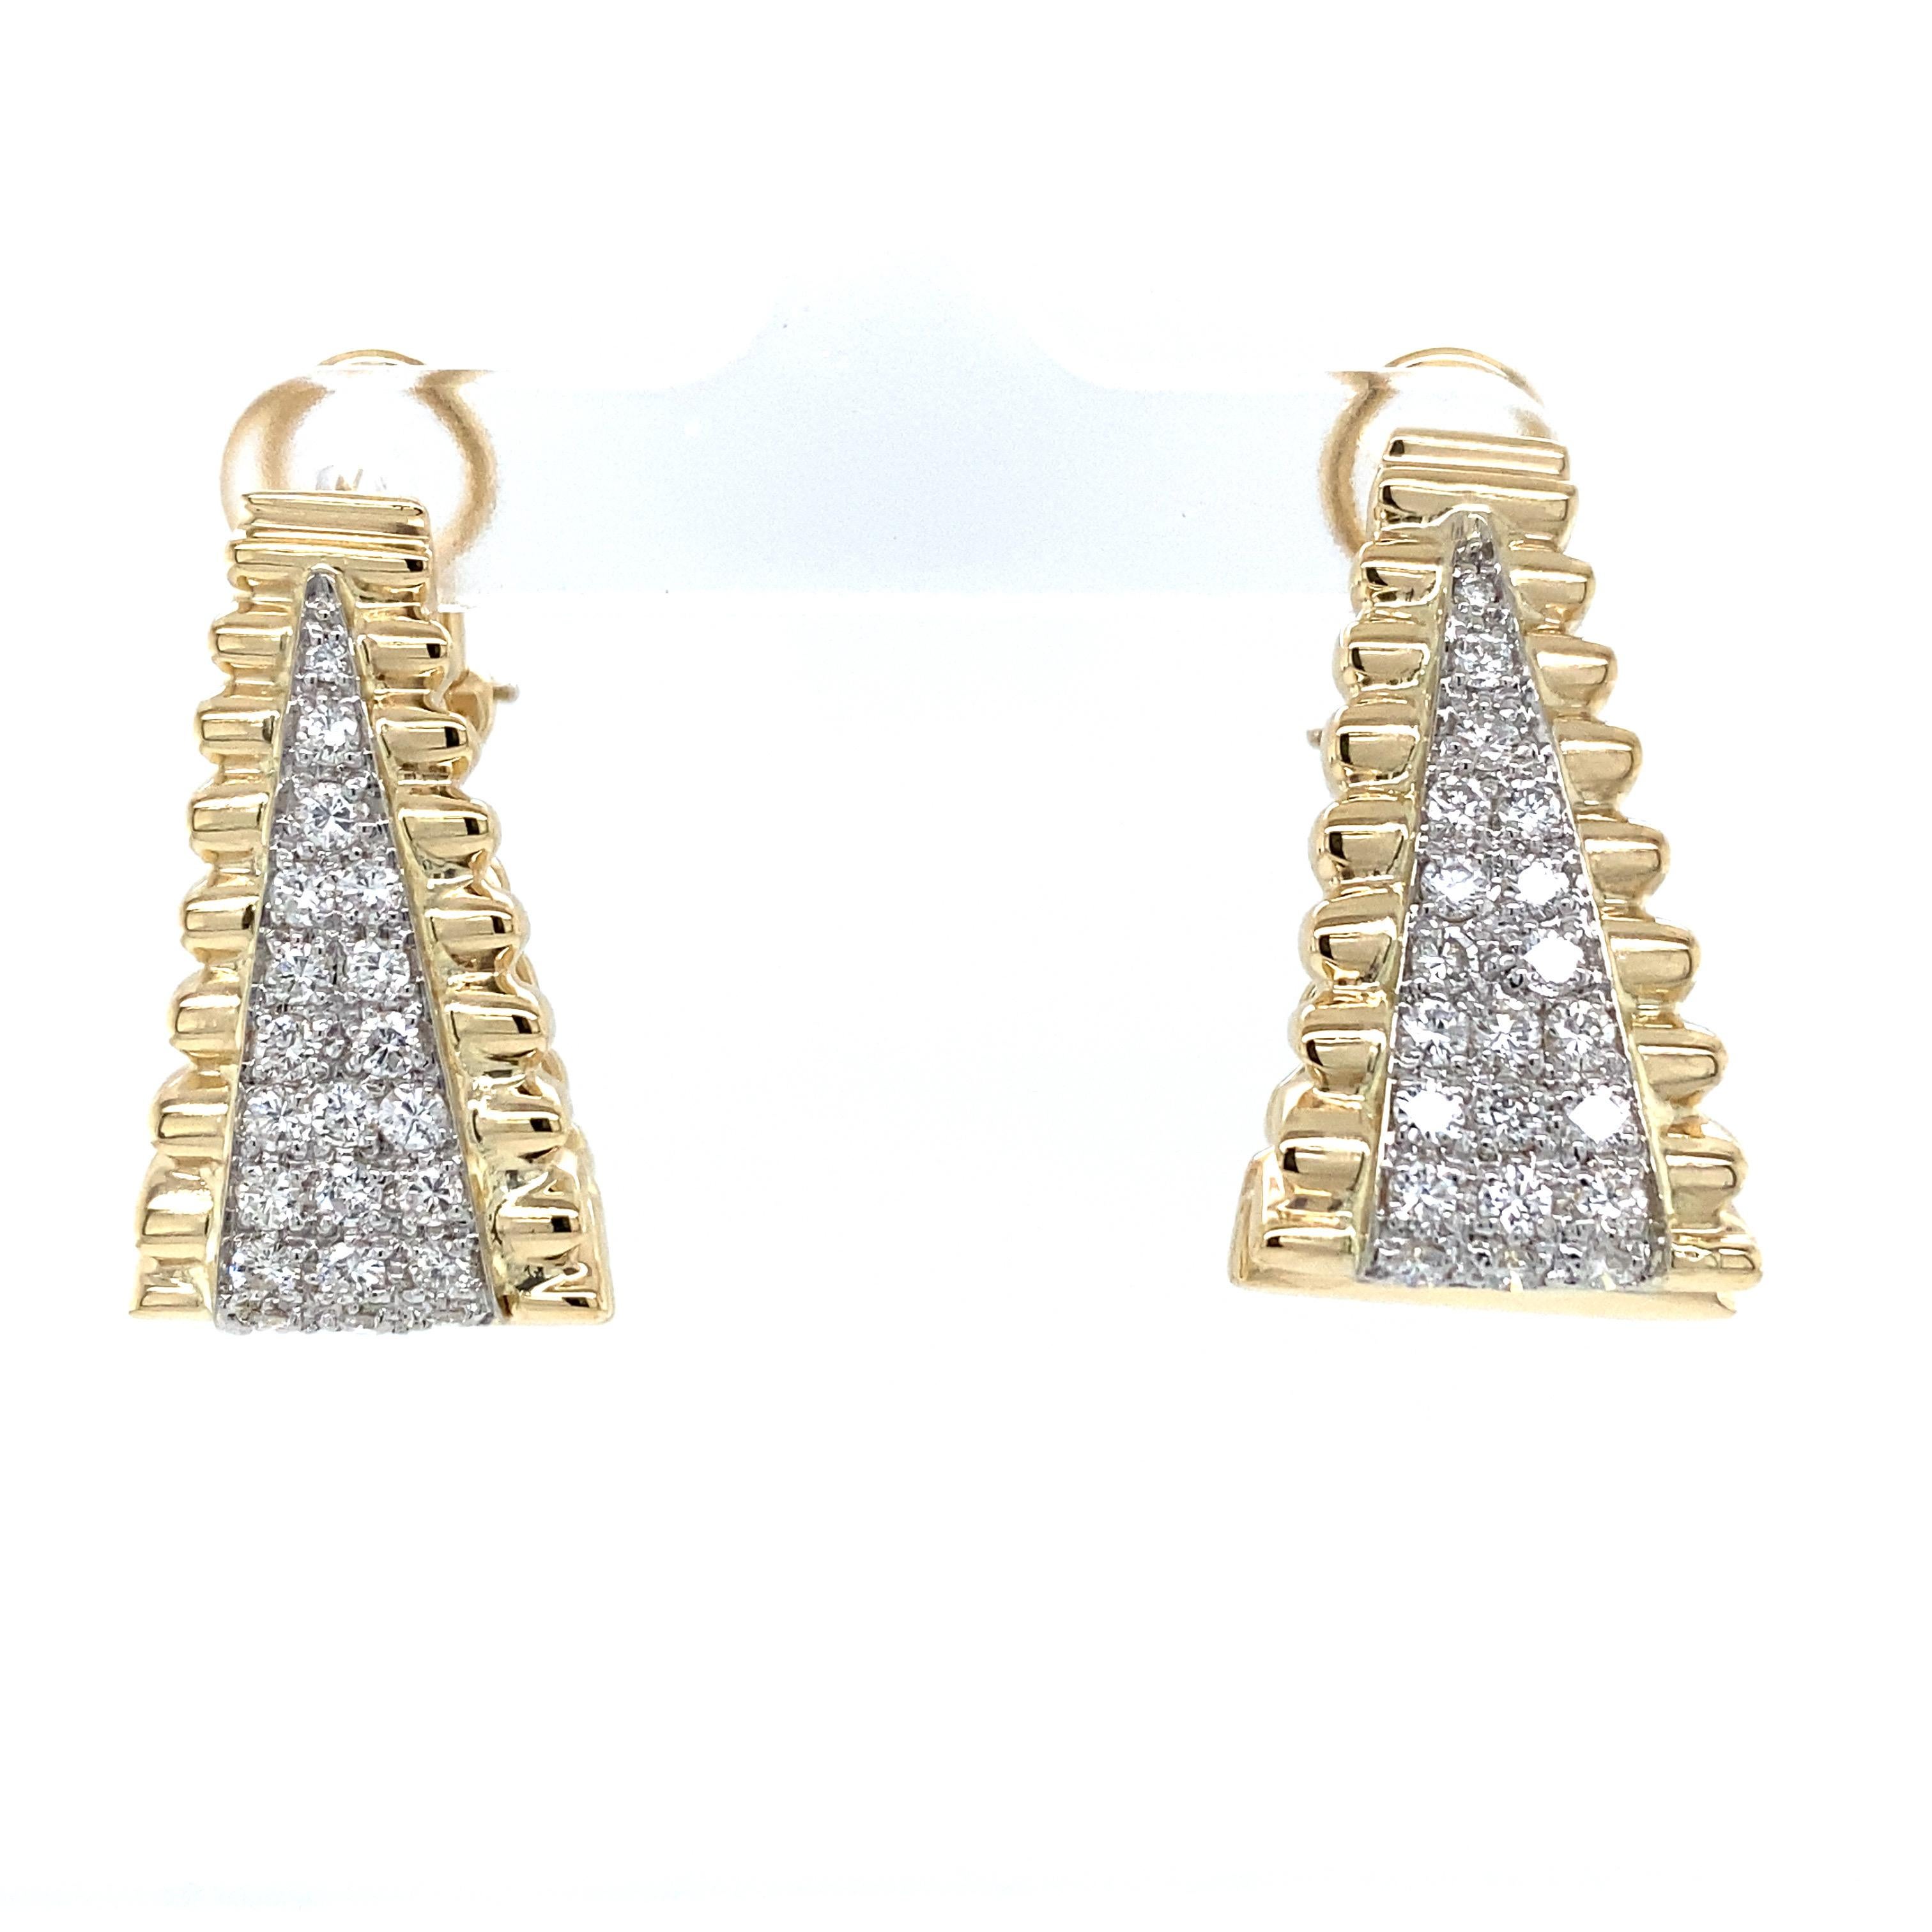 Hammerman Brothers Diamond Elongated Hoop Earring in 14K Two-Tone Gold.  (54) Round Brilliant Cut Diamonds weighing 1.30 carat total weight, G-I in color and VS-SI in clarity are expertly set.  The Earrings measures 1 1/8 inch in length and 1/2 inch